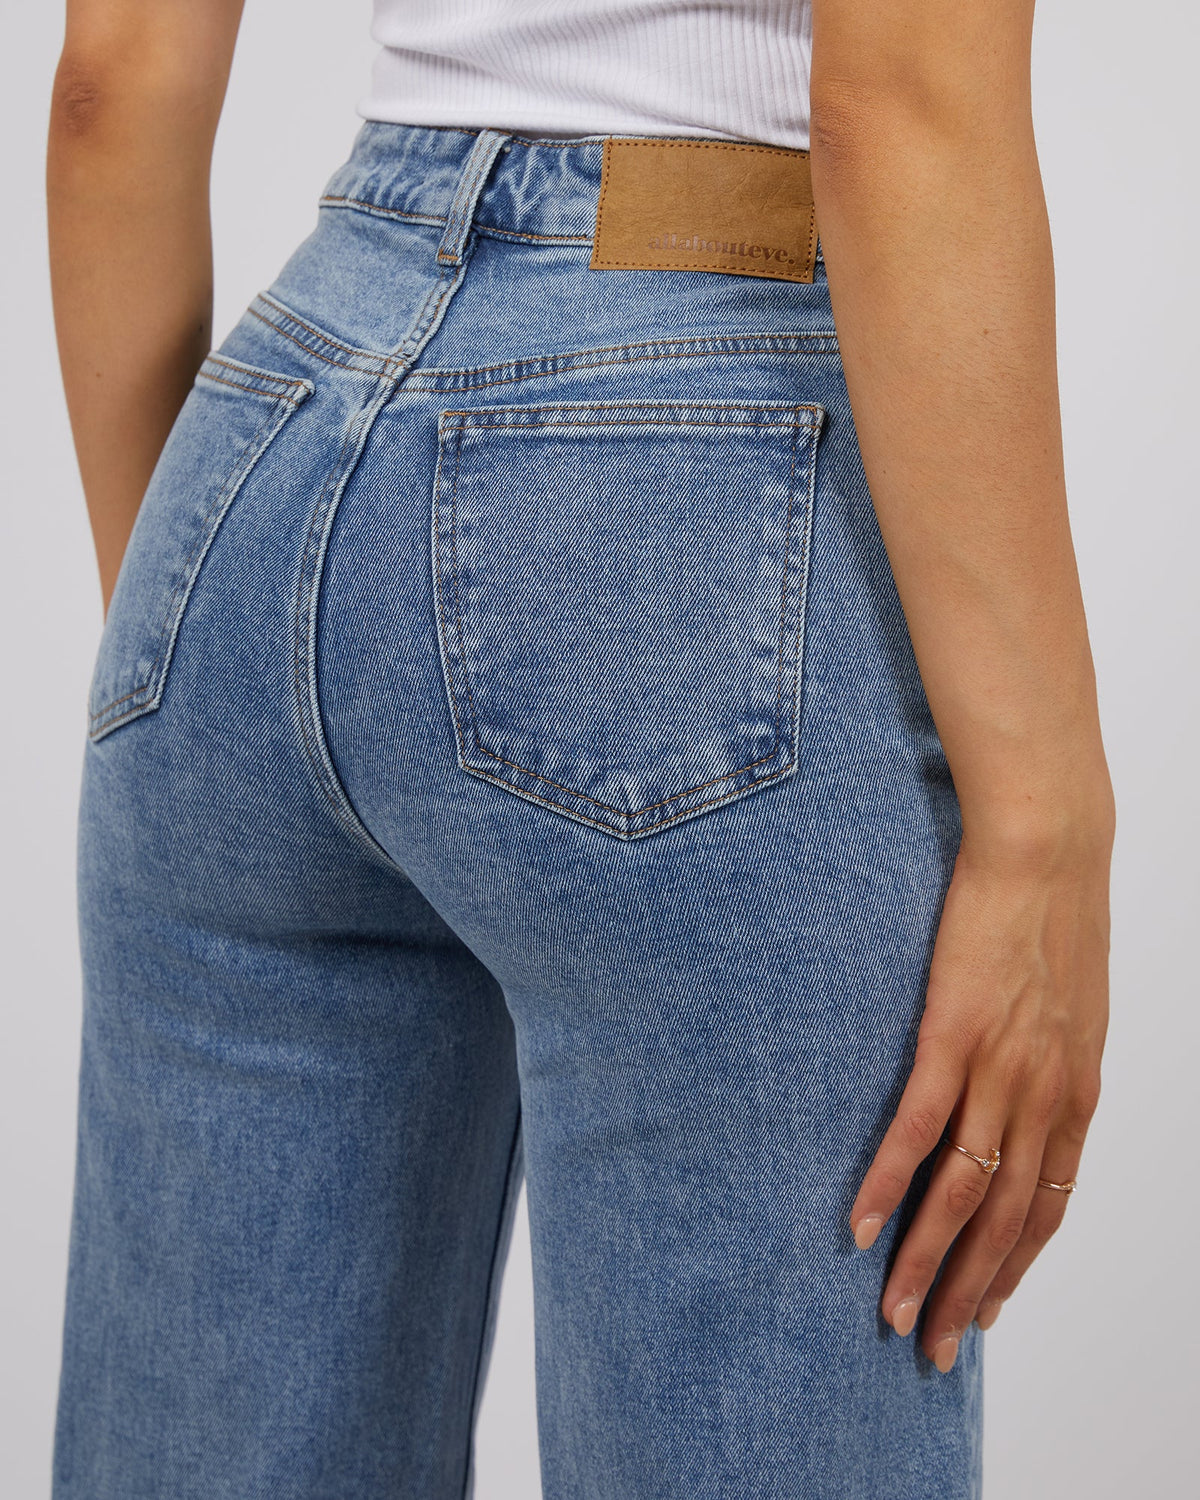 All About Eve-Skye Comfort Jean Heritage Blue-Edge Clothing